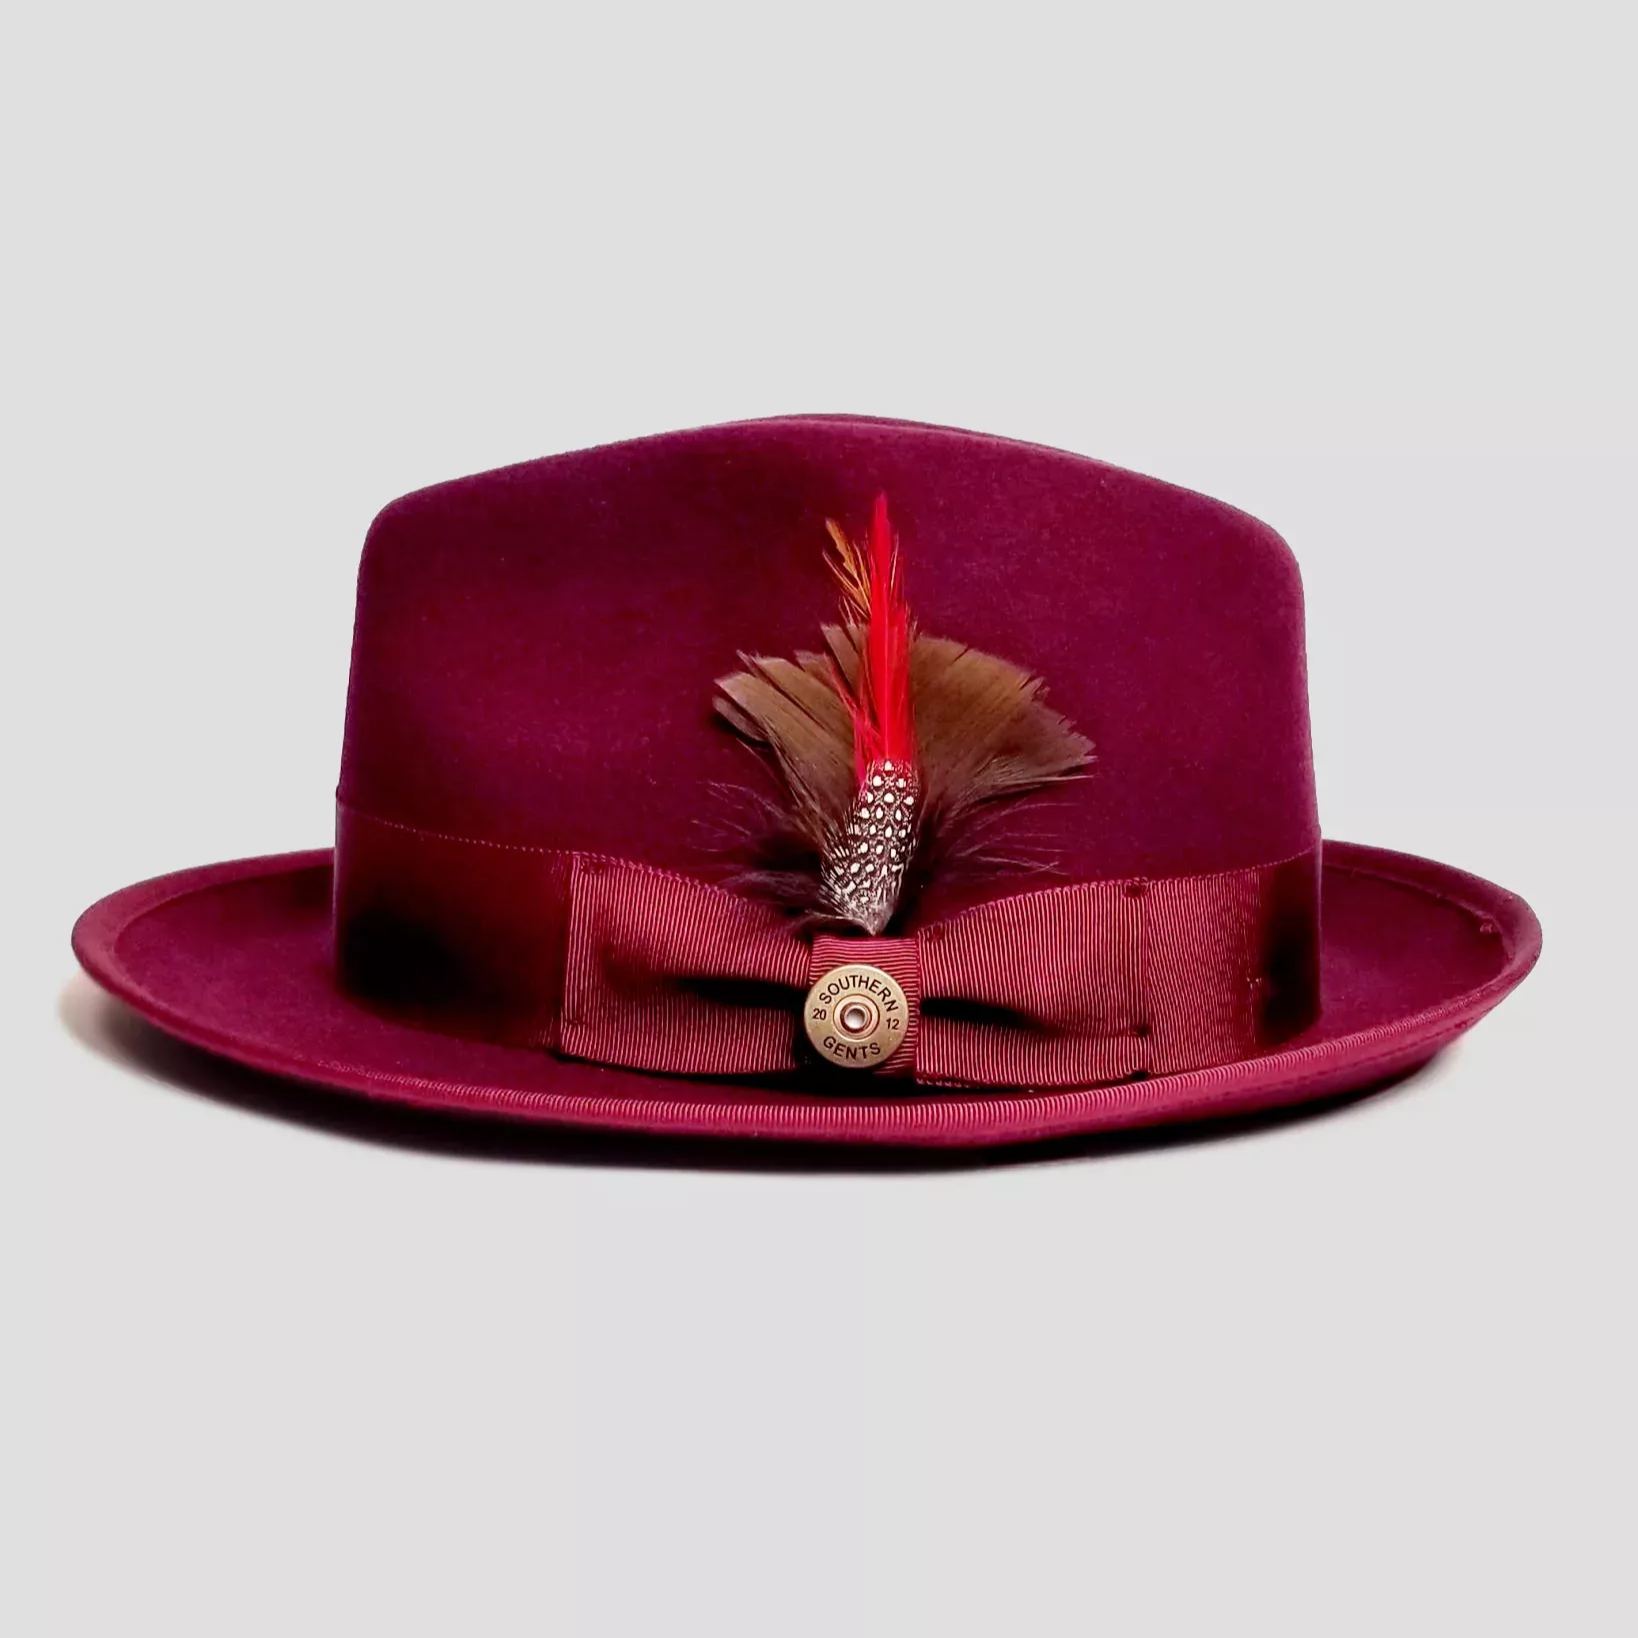 Trilby Fedora – Burgundy[Fast shipping and box packing]